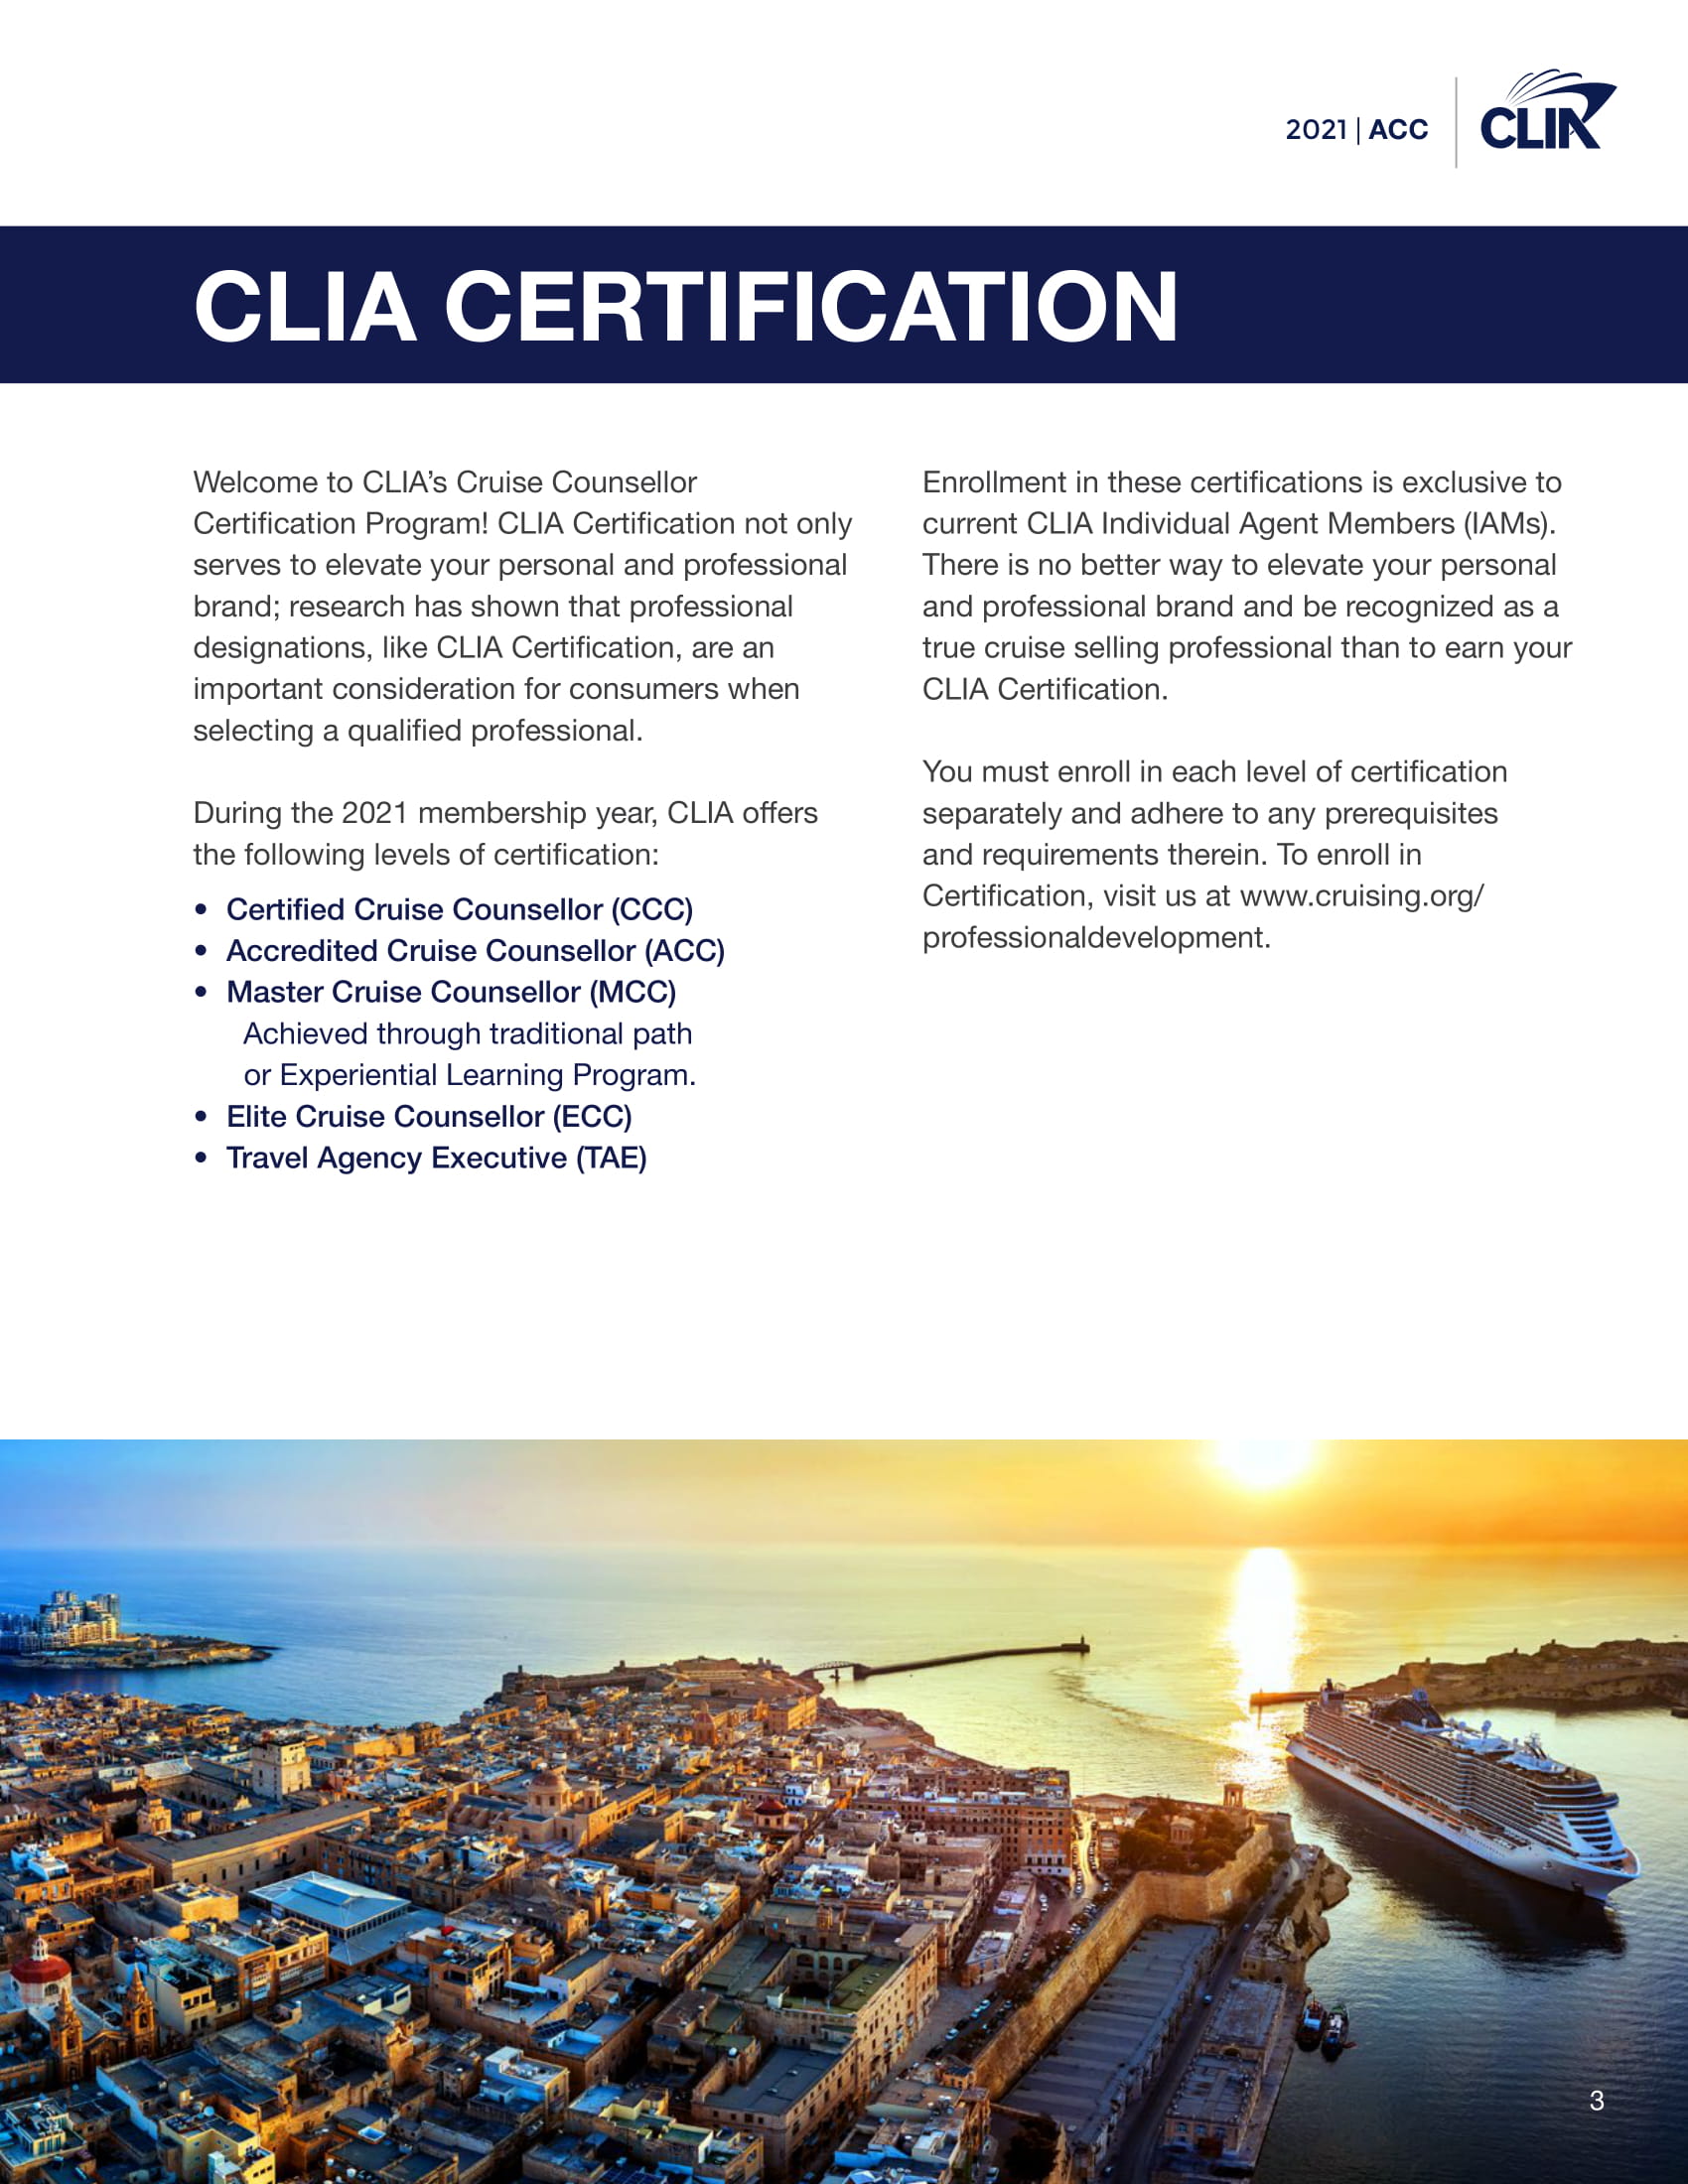 Accredited Cruise Counsellor Program - cliaacclogbook2021-1212020-03